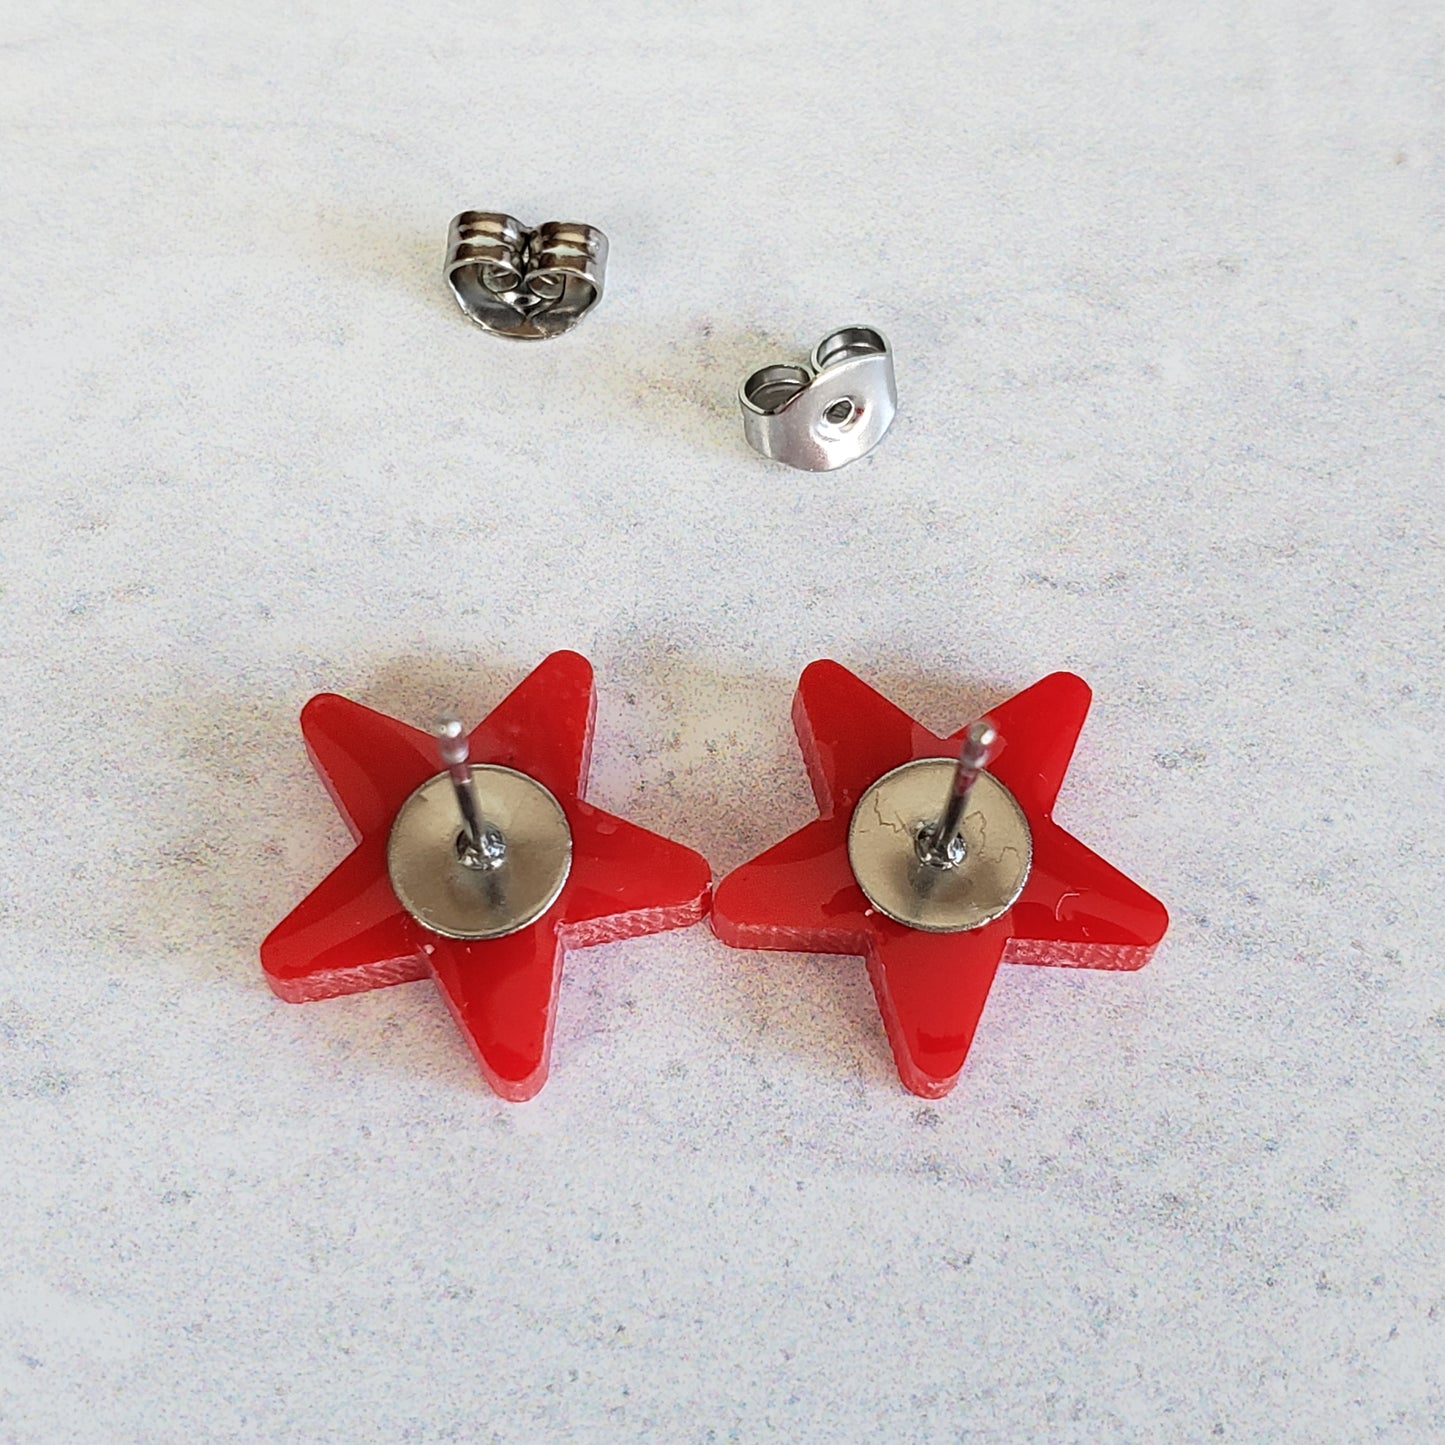 Backside of red star stud earrings showing posts